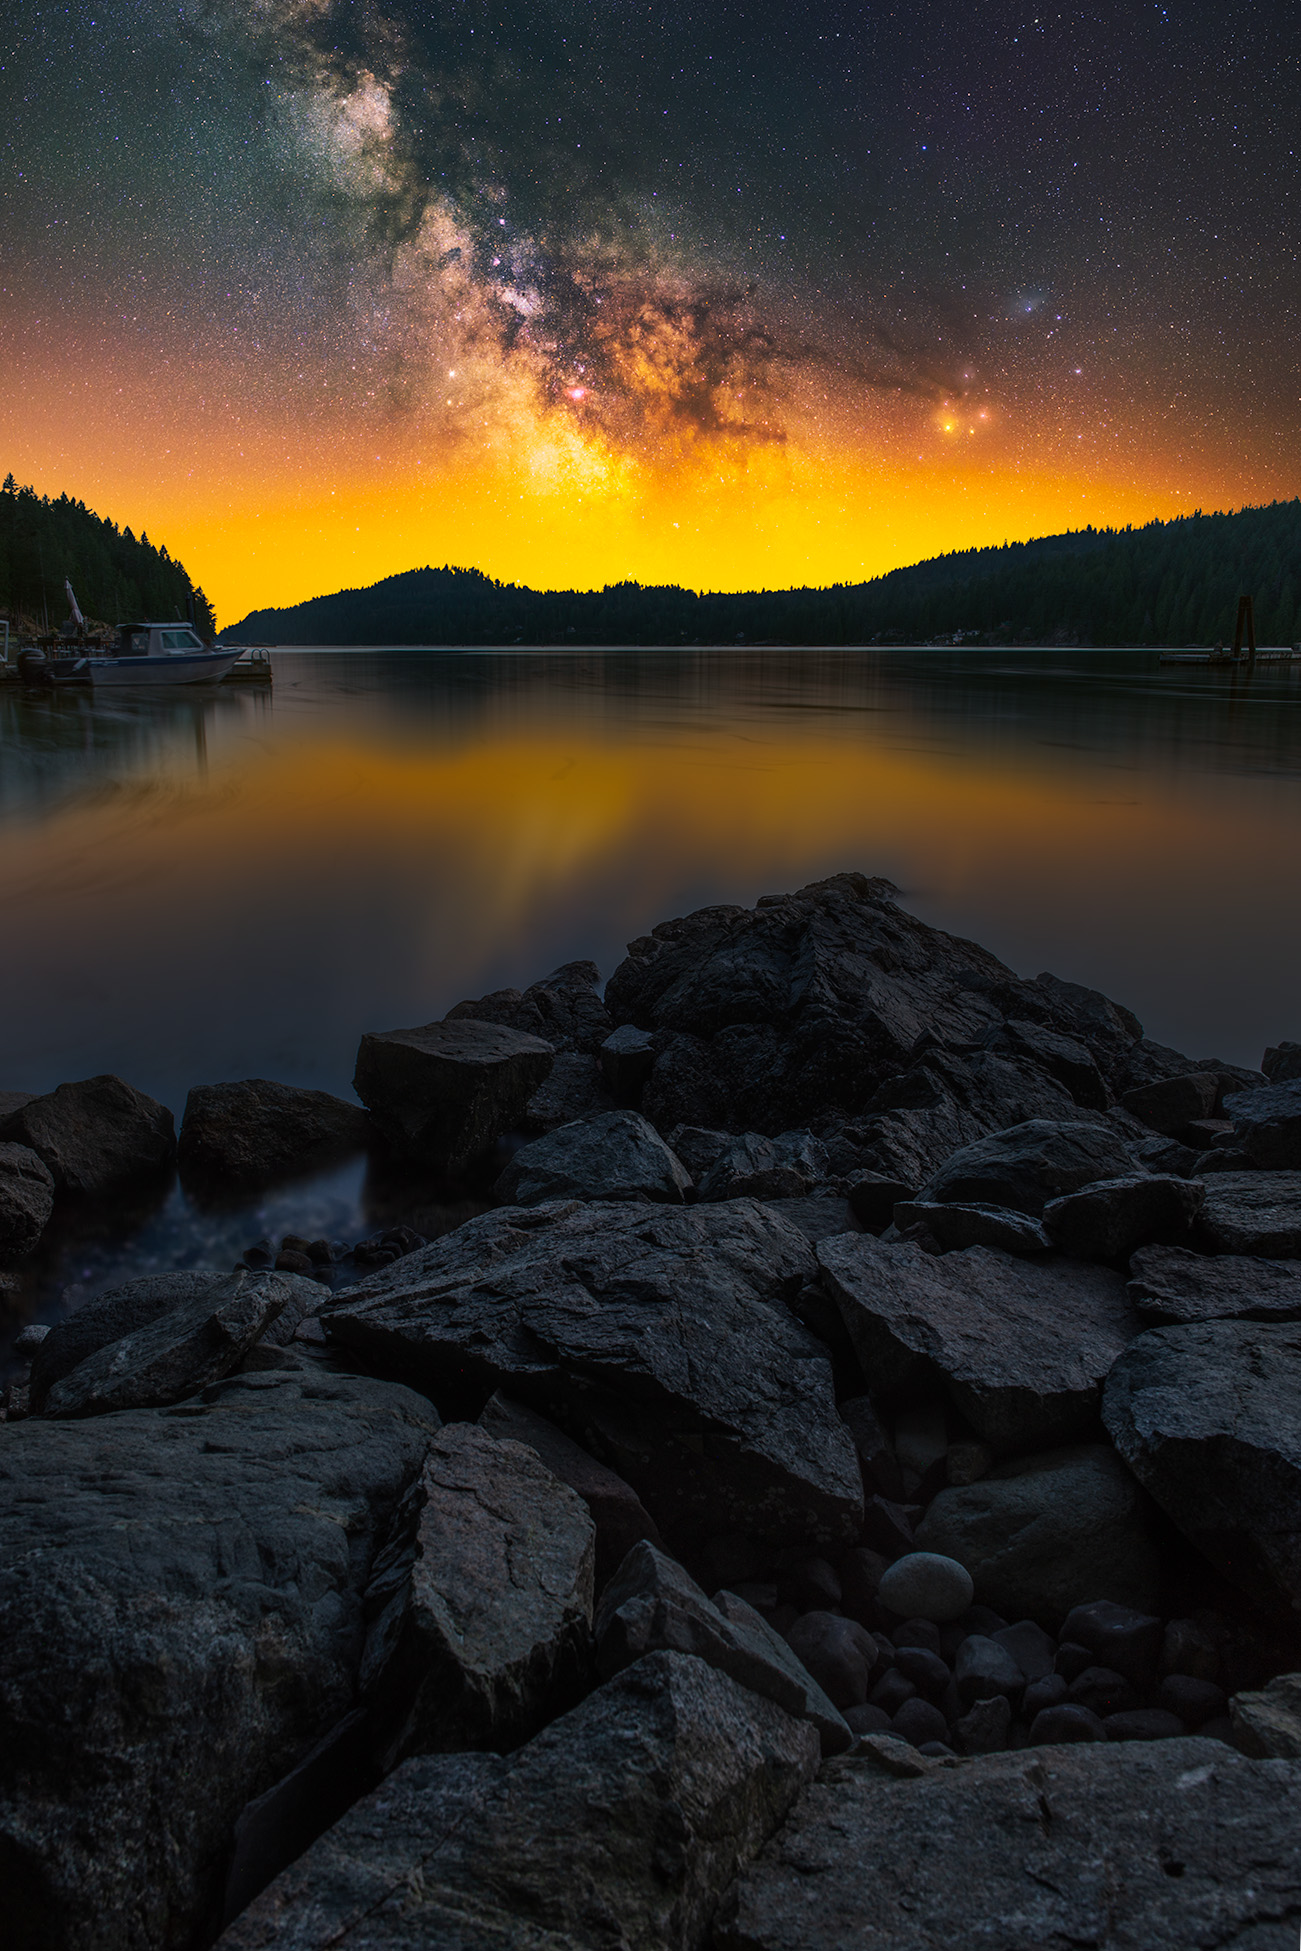 Landscape astrophotography in British Columbia on Gambier Island. The milky way rises above the ocean coastline